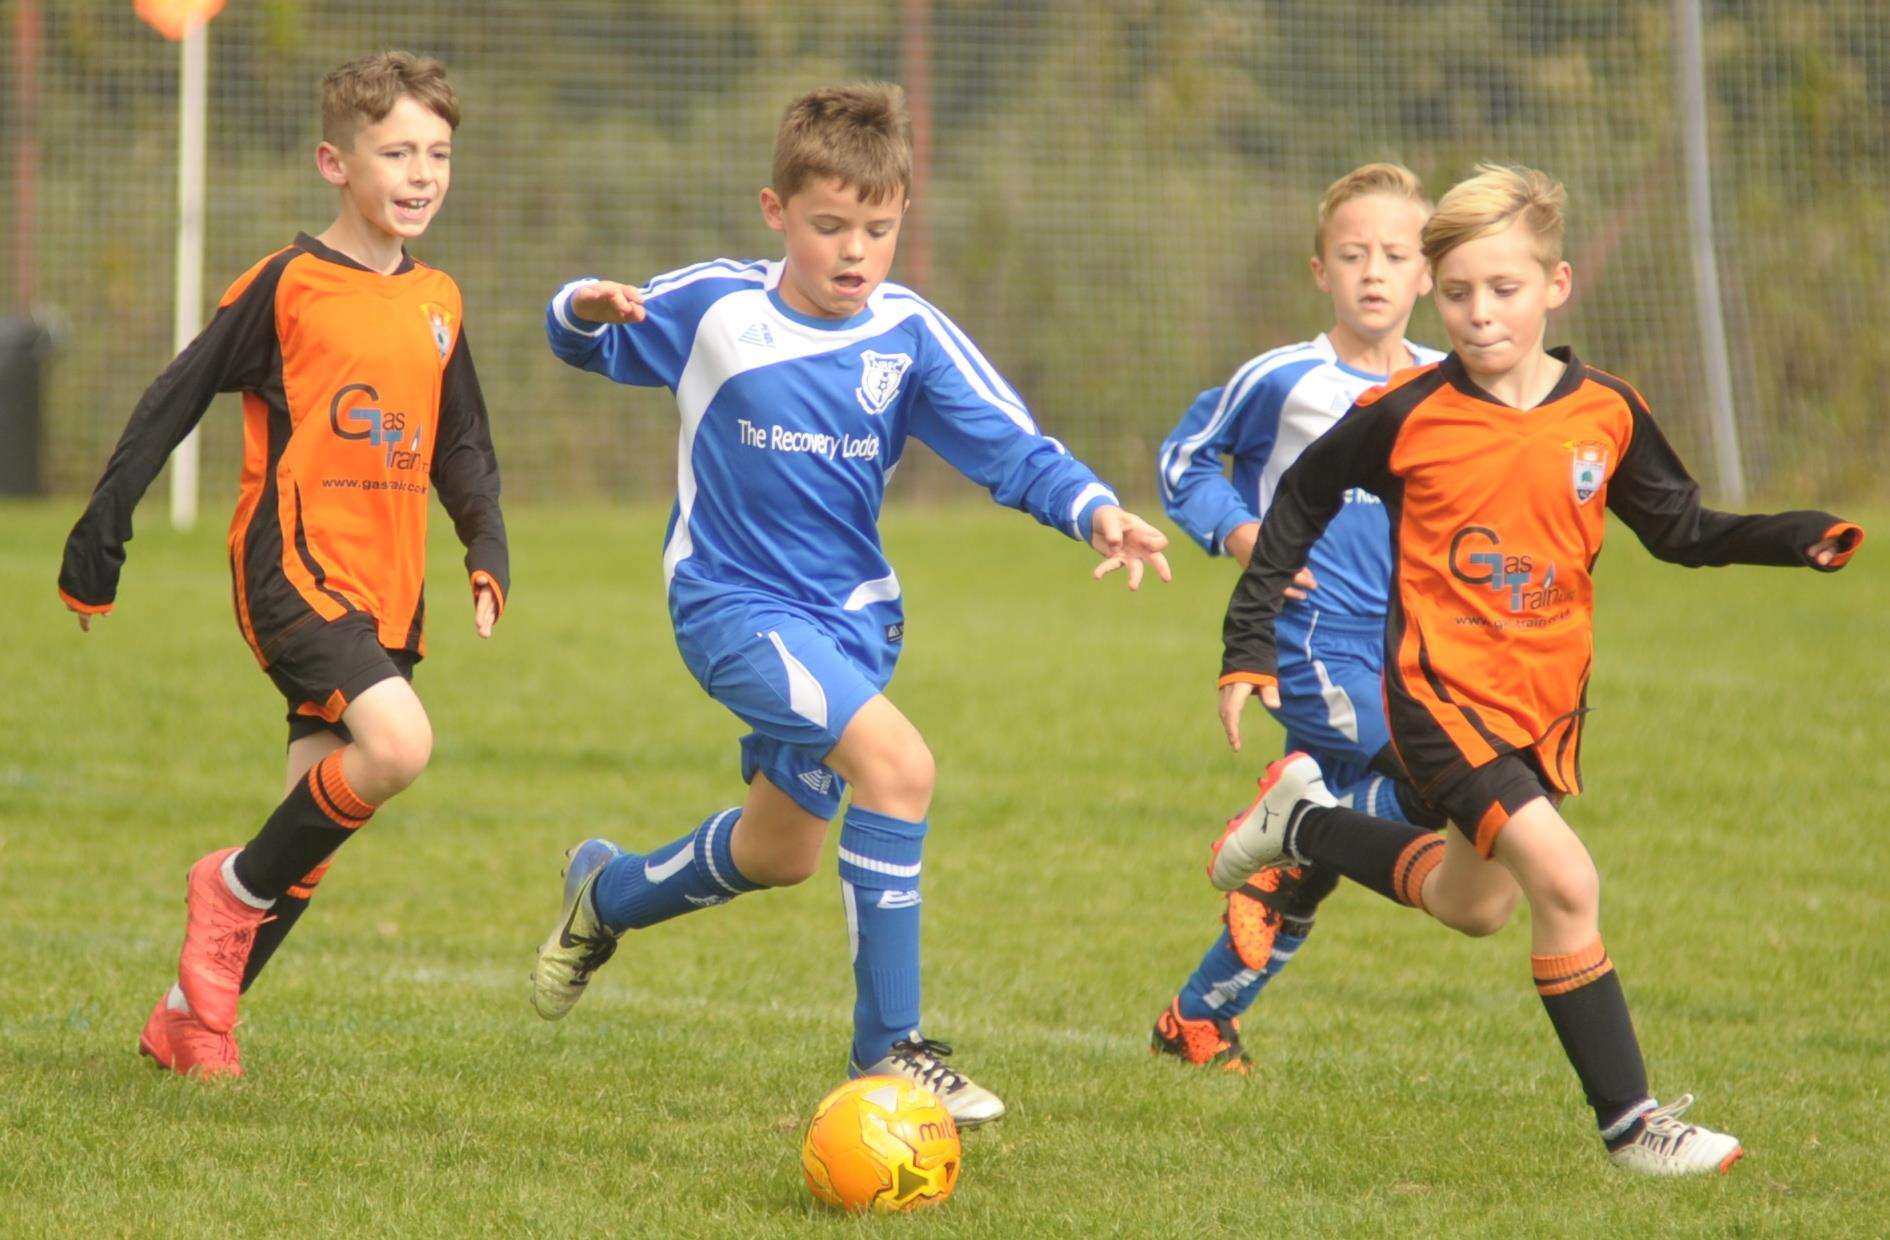 New Road under-9s run at Lordswood Youth Picture: Steve Crispe